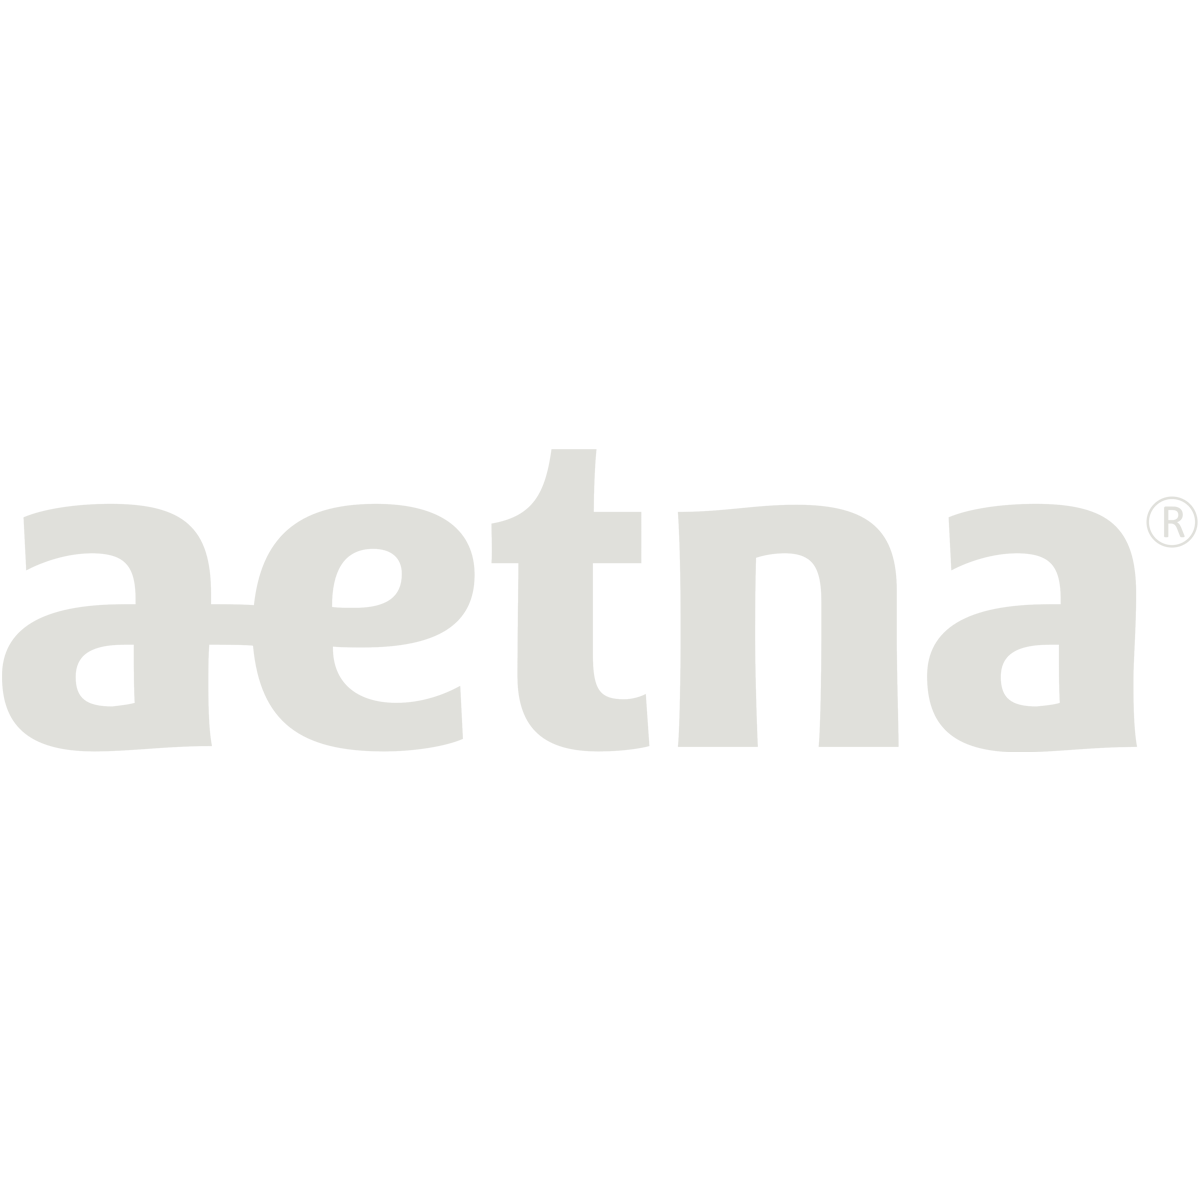 aetna.png